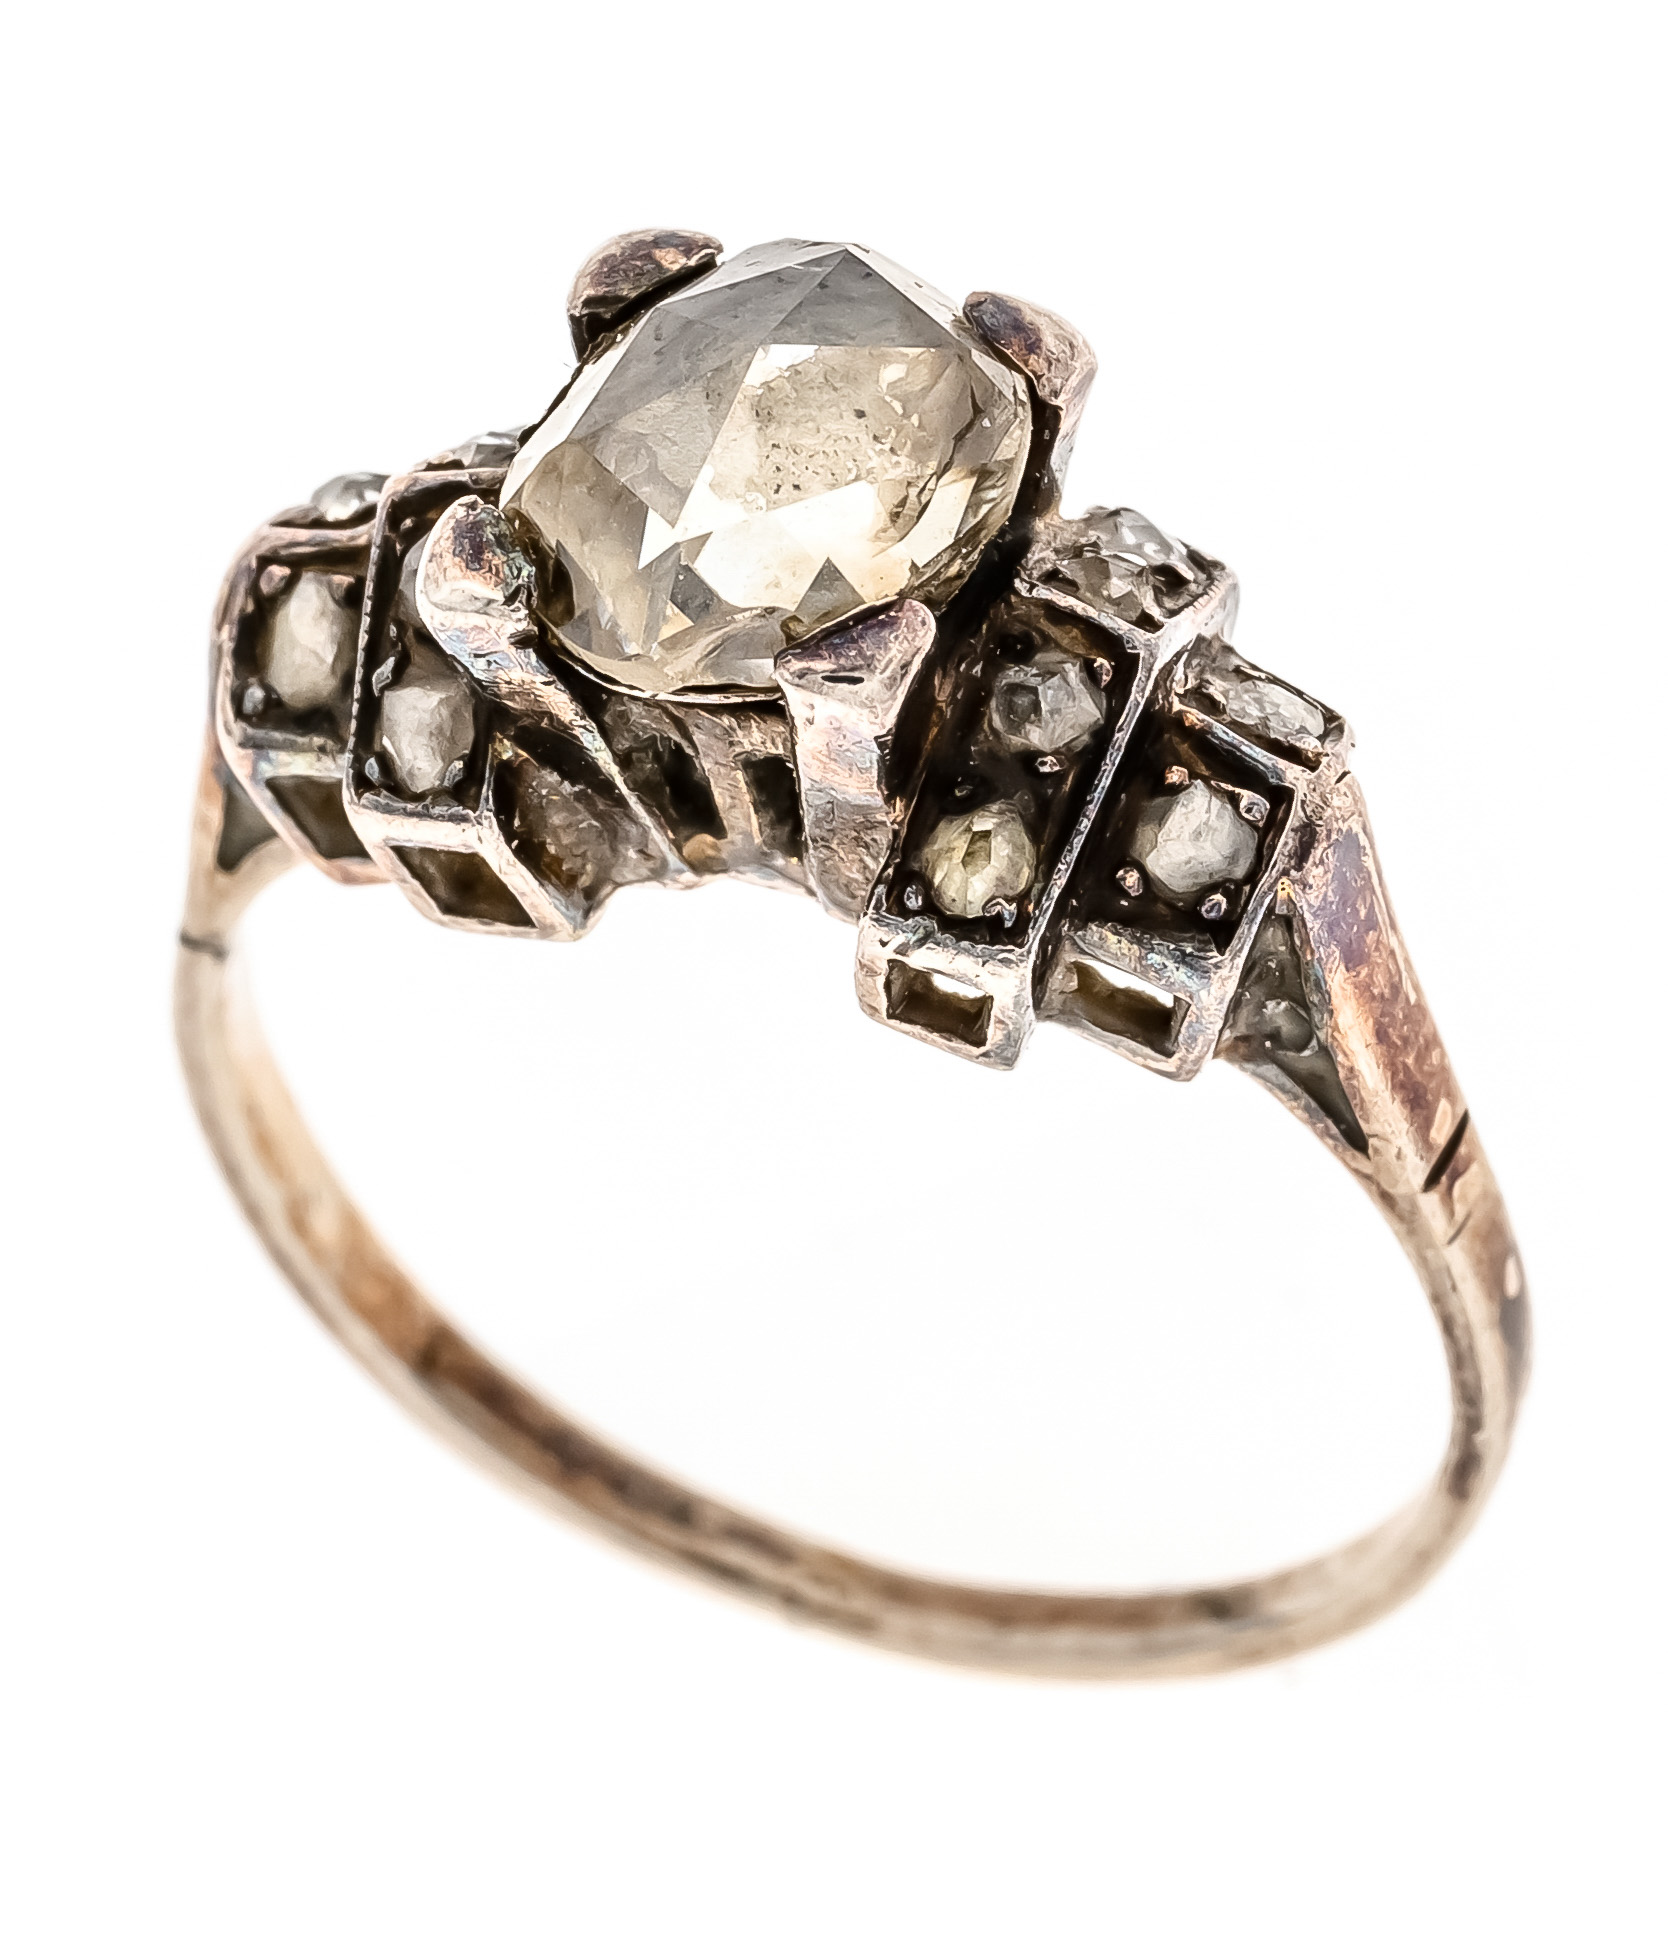 Diamond rose ring gold and silver c. 1840 with 13 diamond roses 6.83 x 5.32 (loose in setting) - 1.